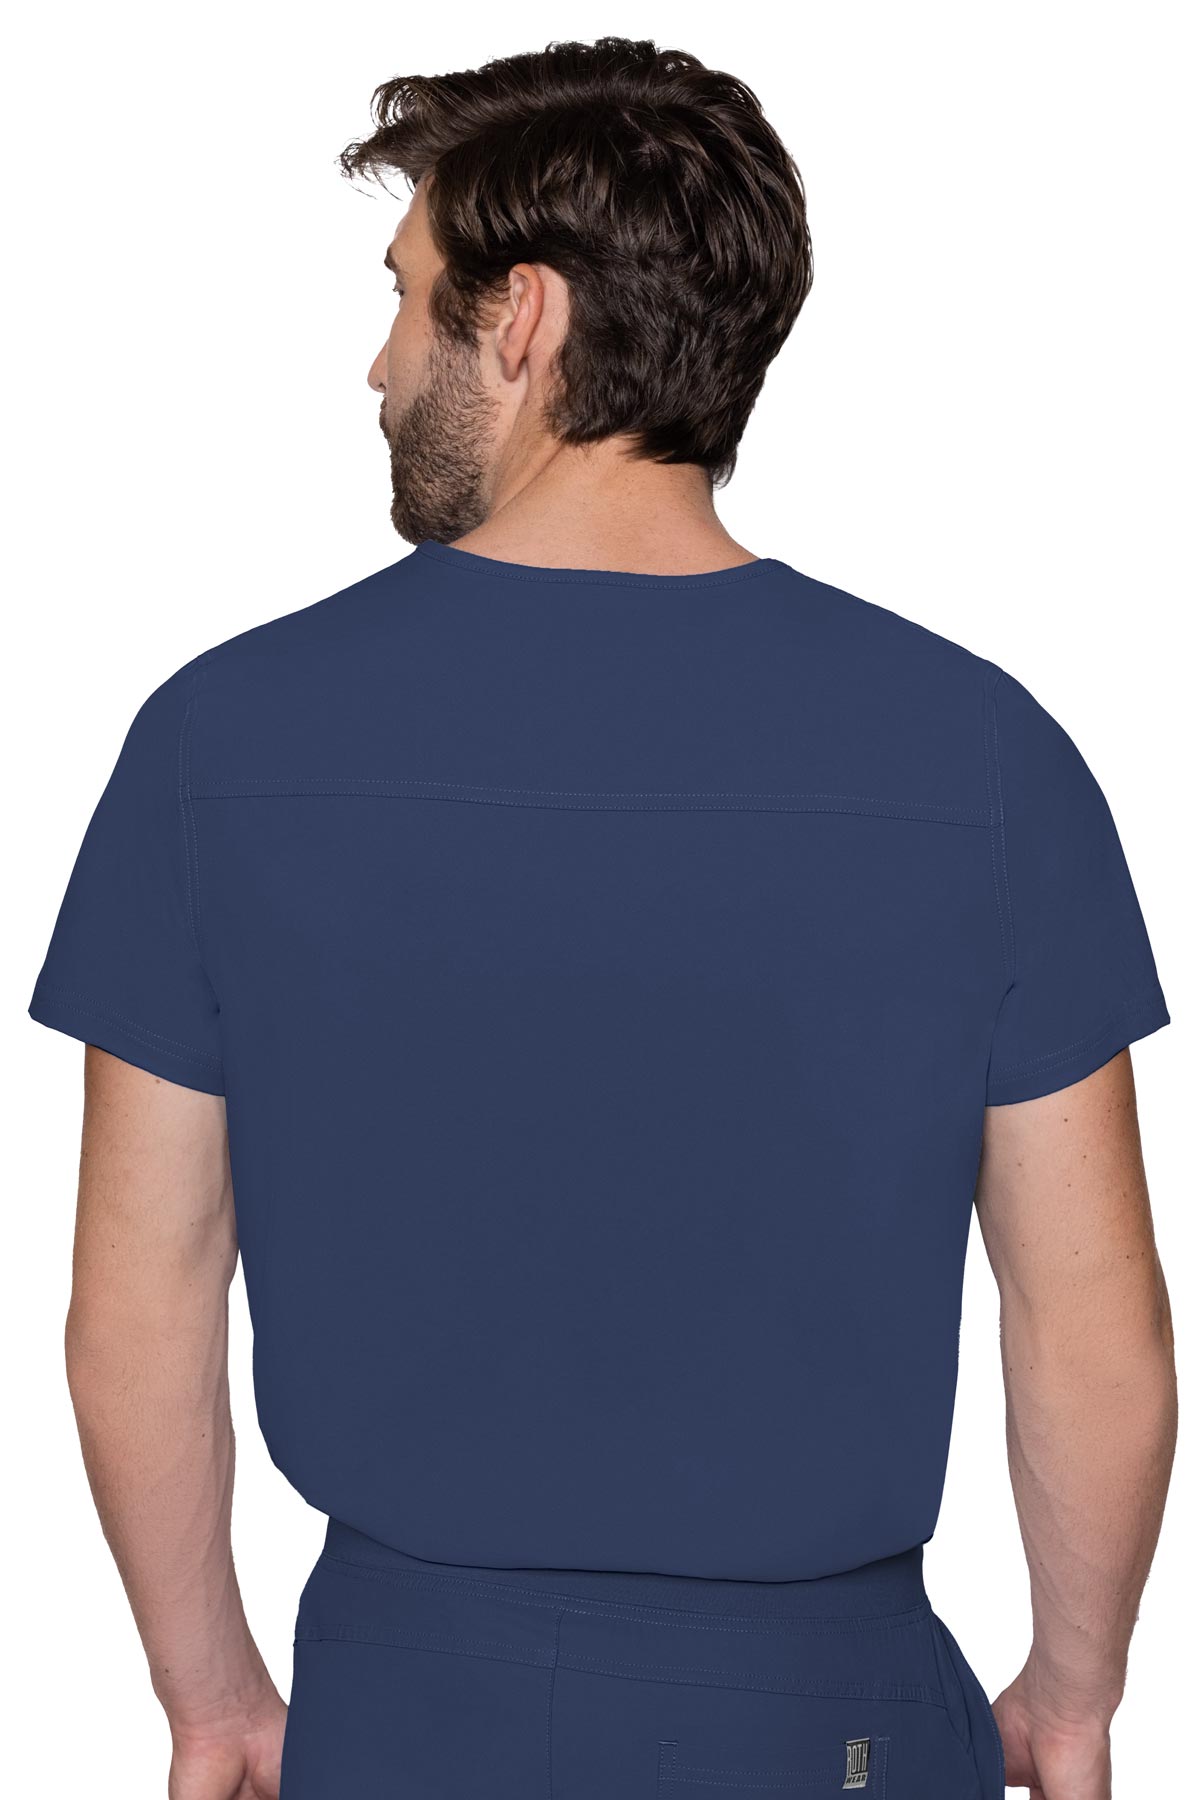 Med Couture Roth Wear Insight 2478 Men's Top Navy Back